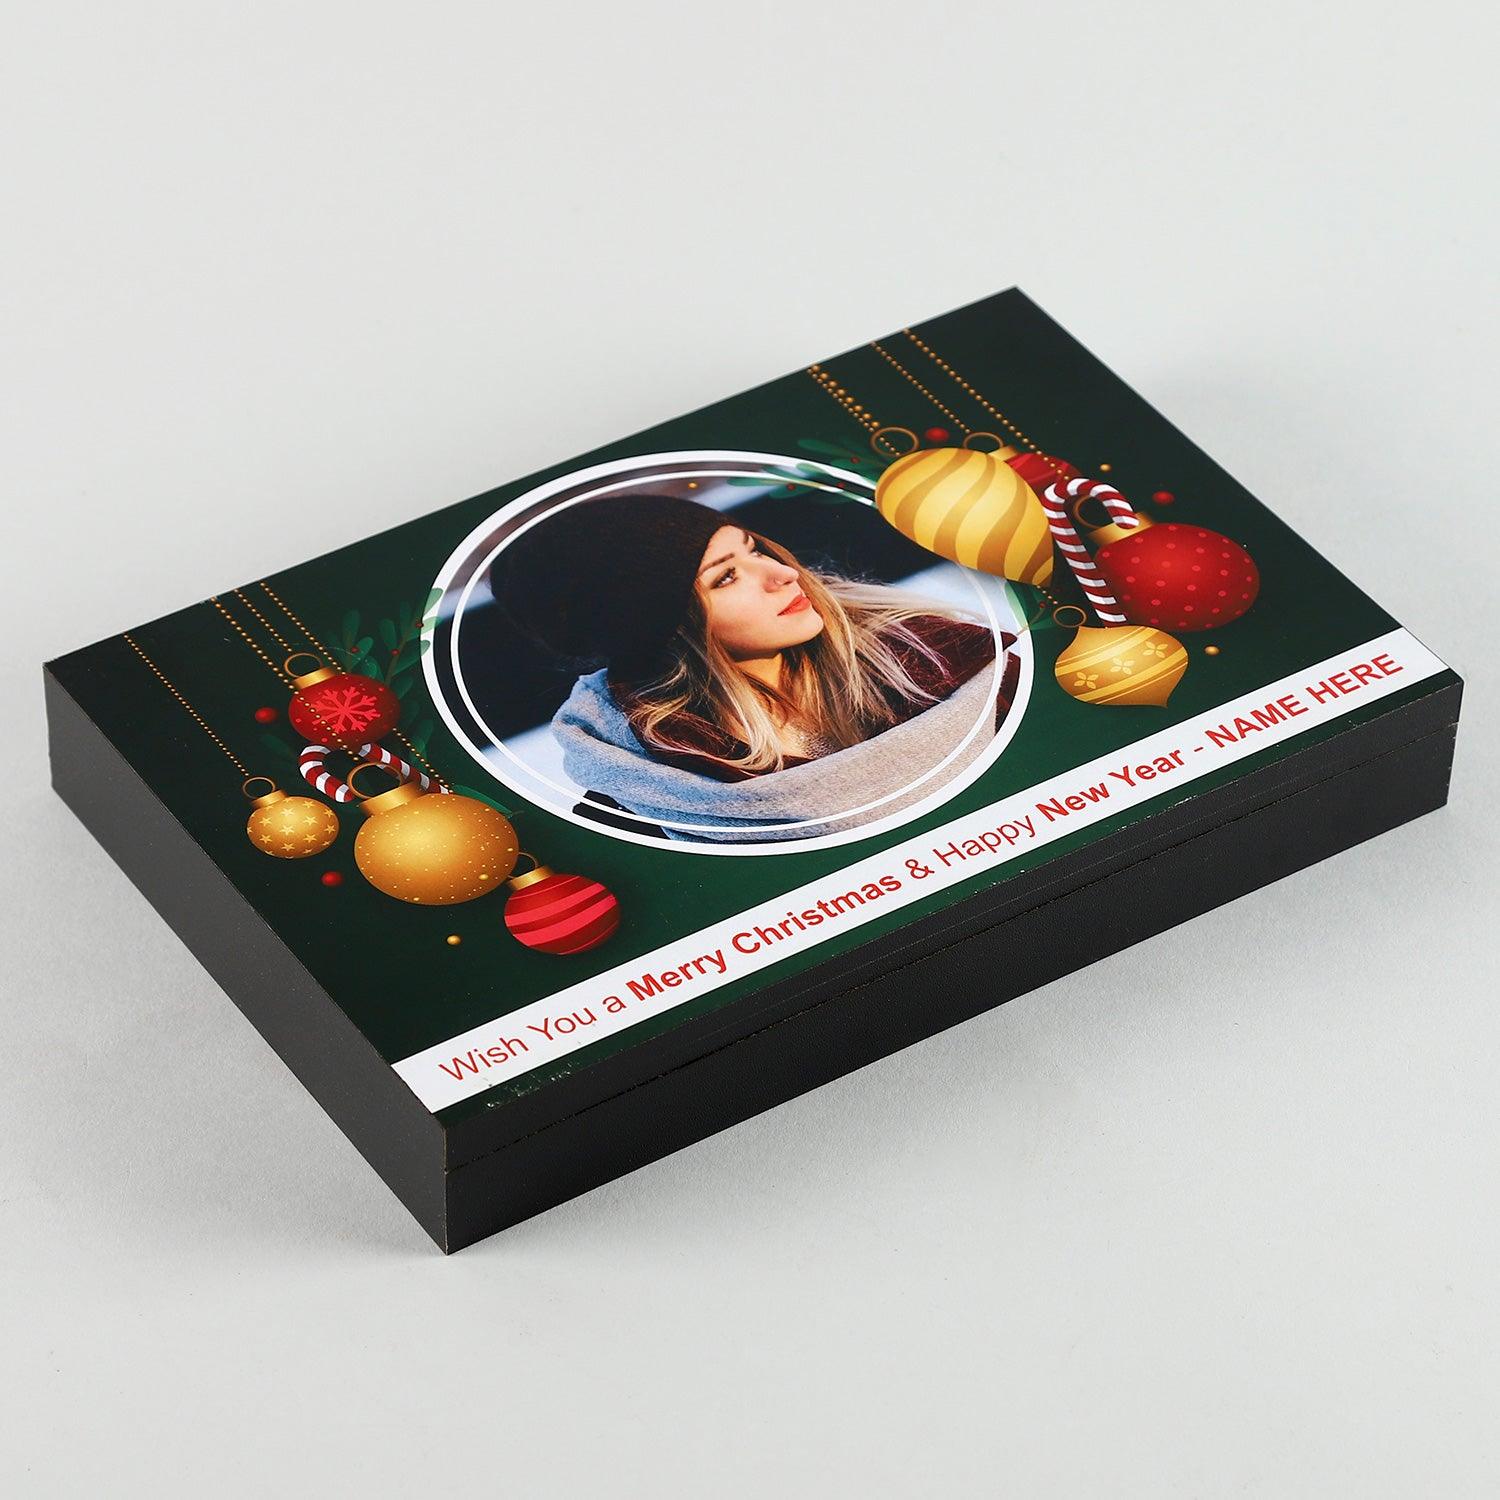 Personalized Photo Chocolate Gift for New Year and Merry Christmas with Print Photo Name and Message - Choco Manual ART